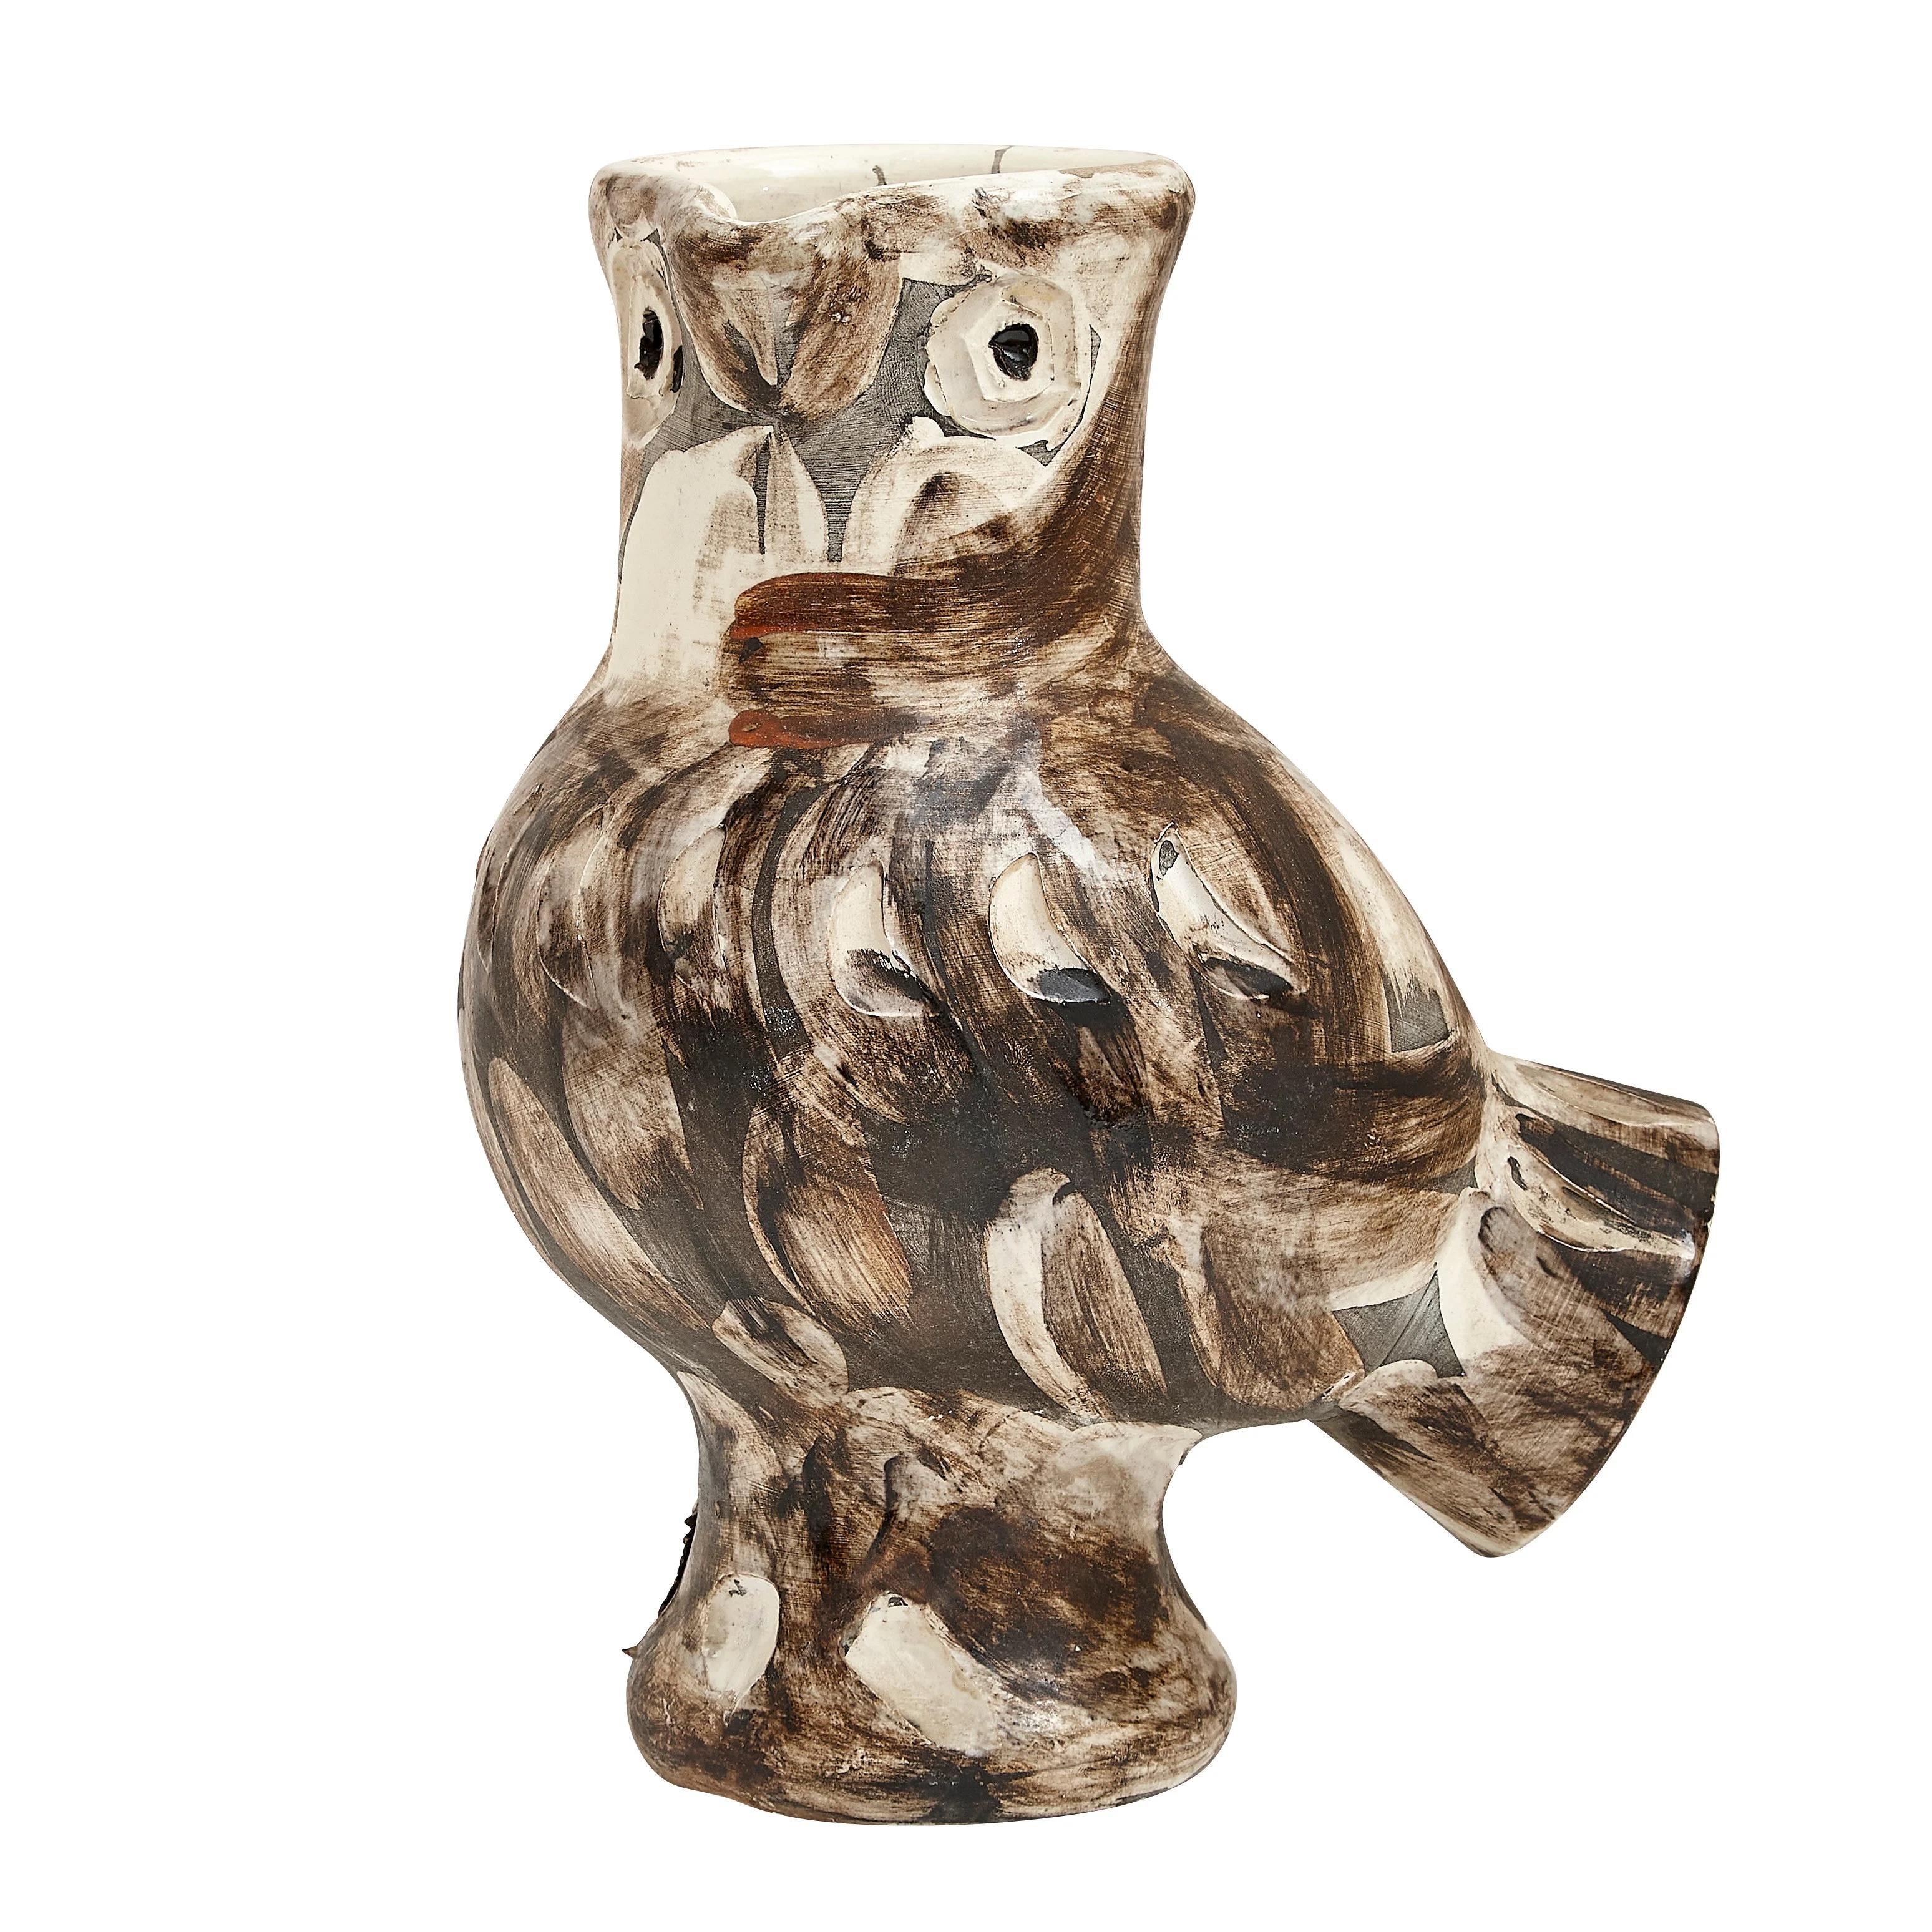 Pablo Picasso 'Chouette' (A. R. 604) Owl Madoura Vase 1969 For Sale 1